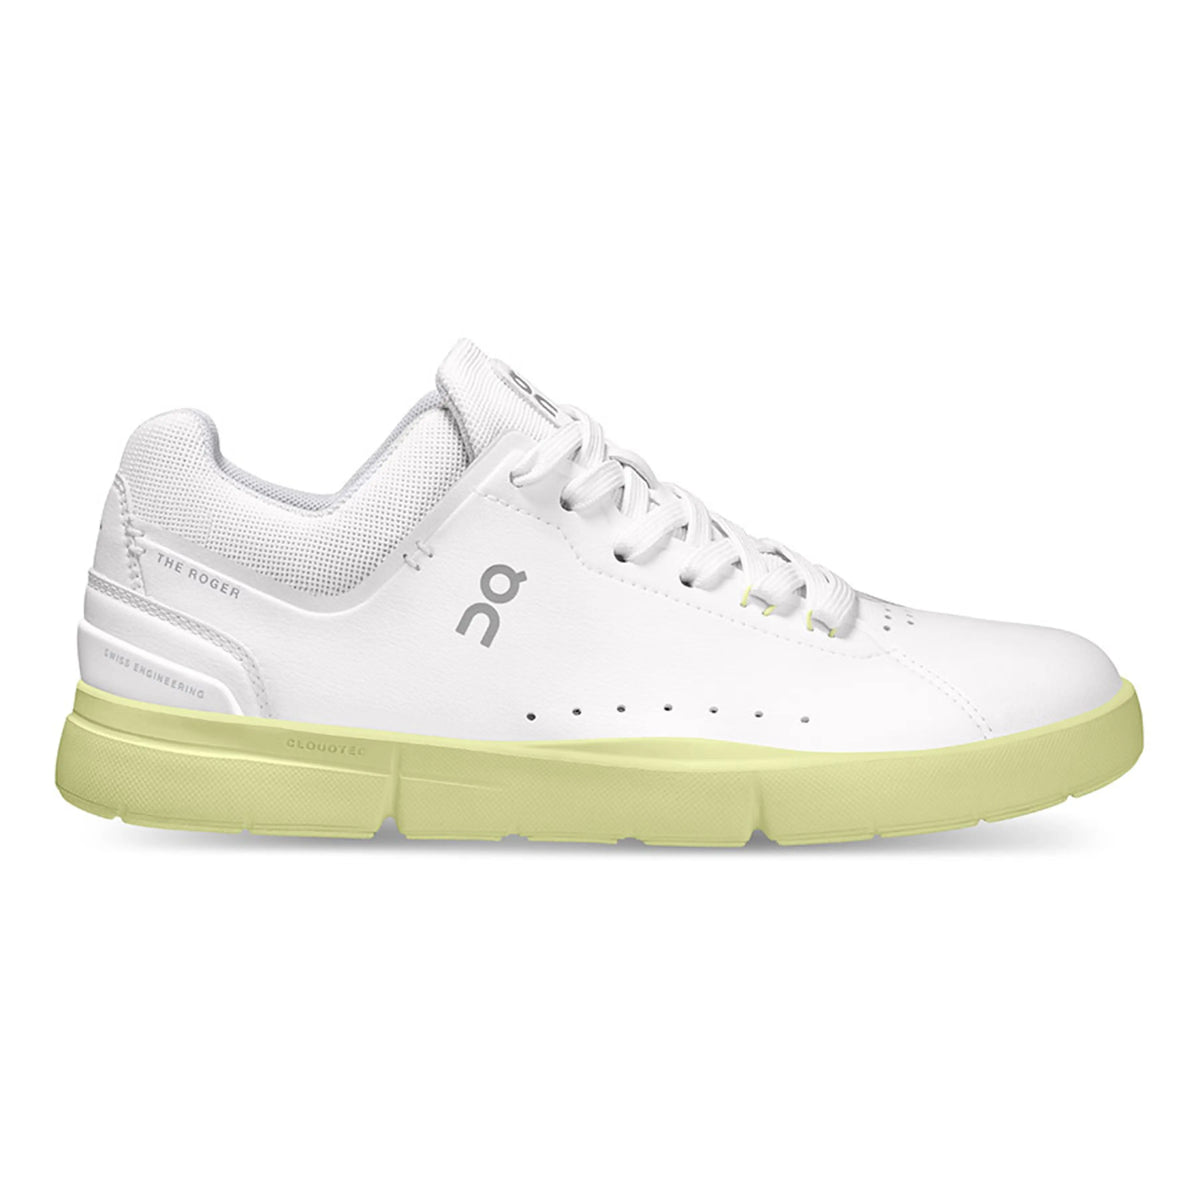 On The Roger Advantage Womens (White/Hay)